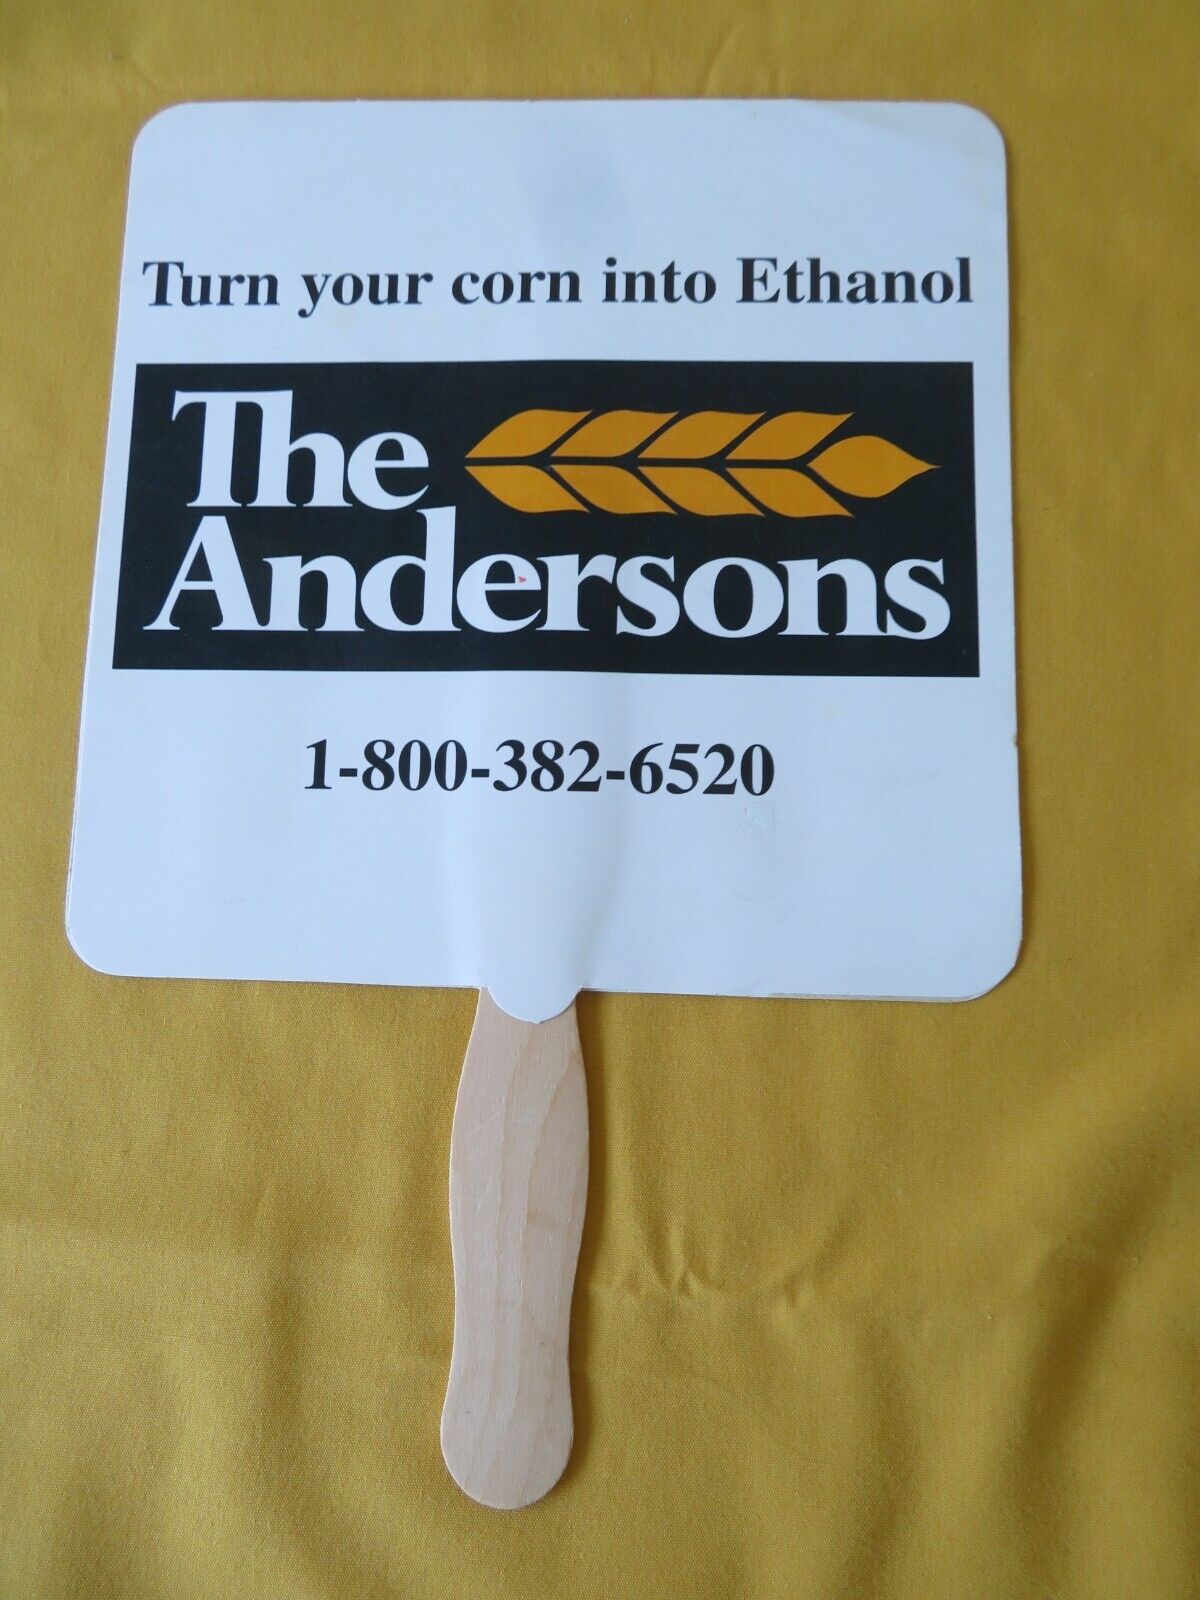 The Andersons Maumee Ohio ETHANOL Advertising Paperboard Fan